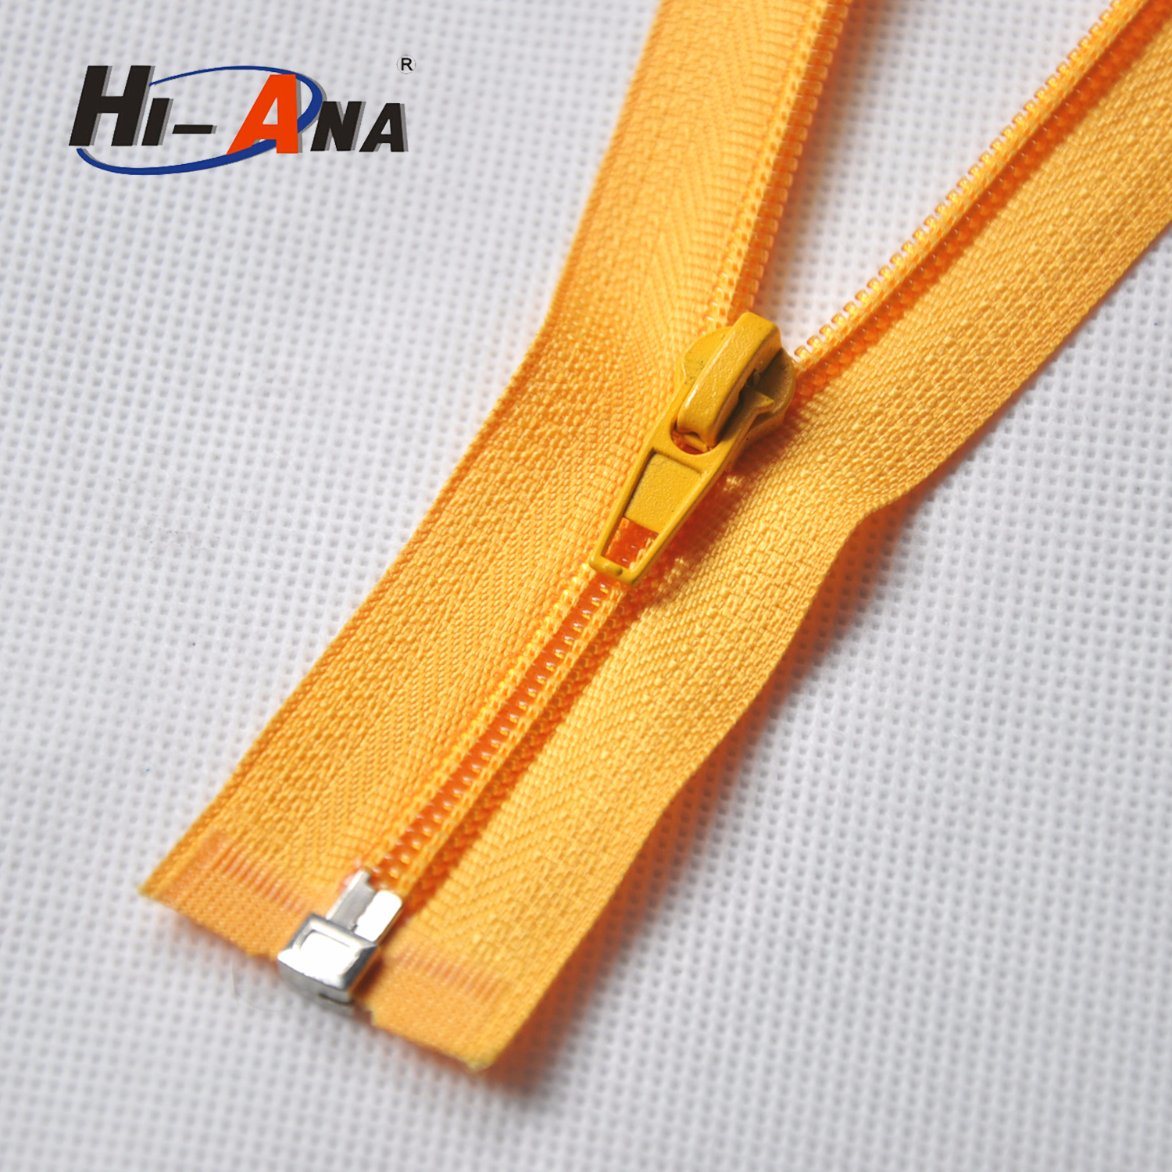 Simplified Sourcing at Competitive Prices High Quality Cable Zipper